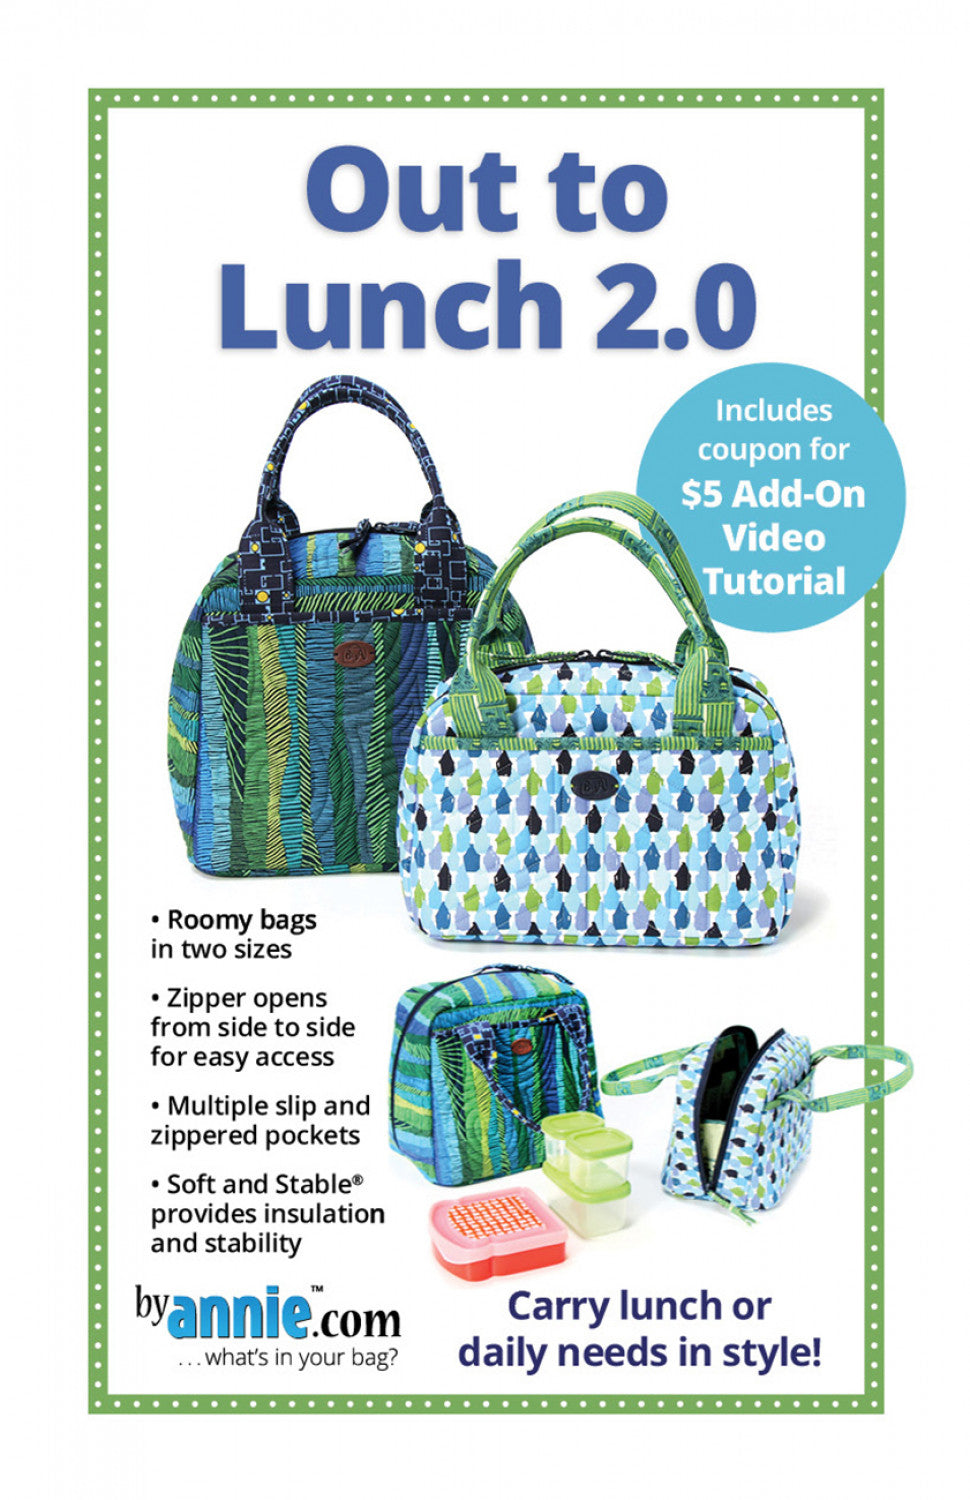 ByAnnie.com and Patterns By Annie - Switchback is our fun-to-sew satchel  pattern! The straps can switch from a backpack-style wear to a crossbody or  over-the-shoulder. Have fun choosing fabrics for the cool